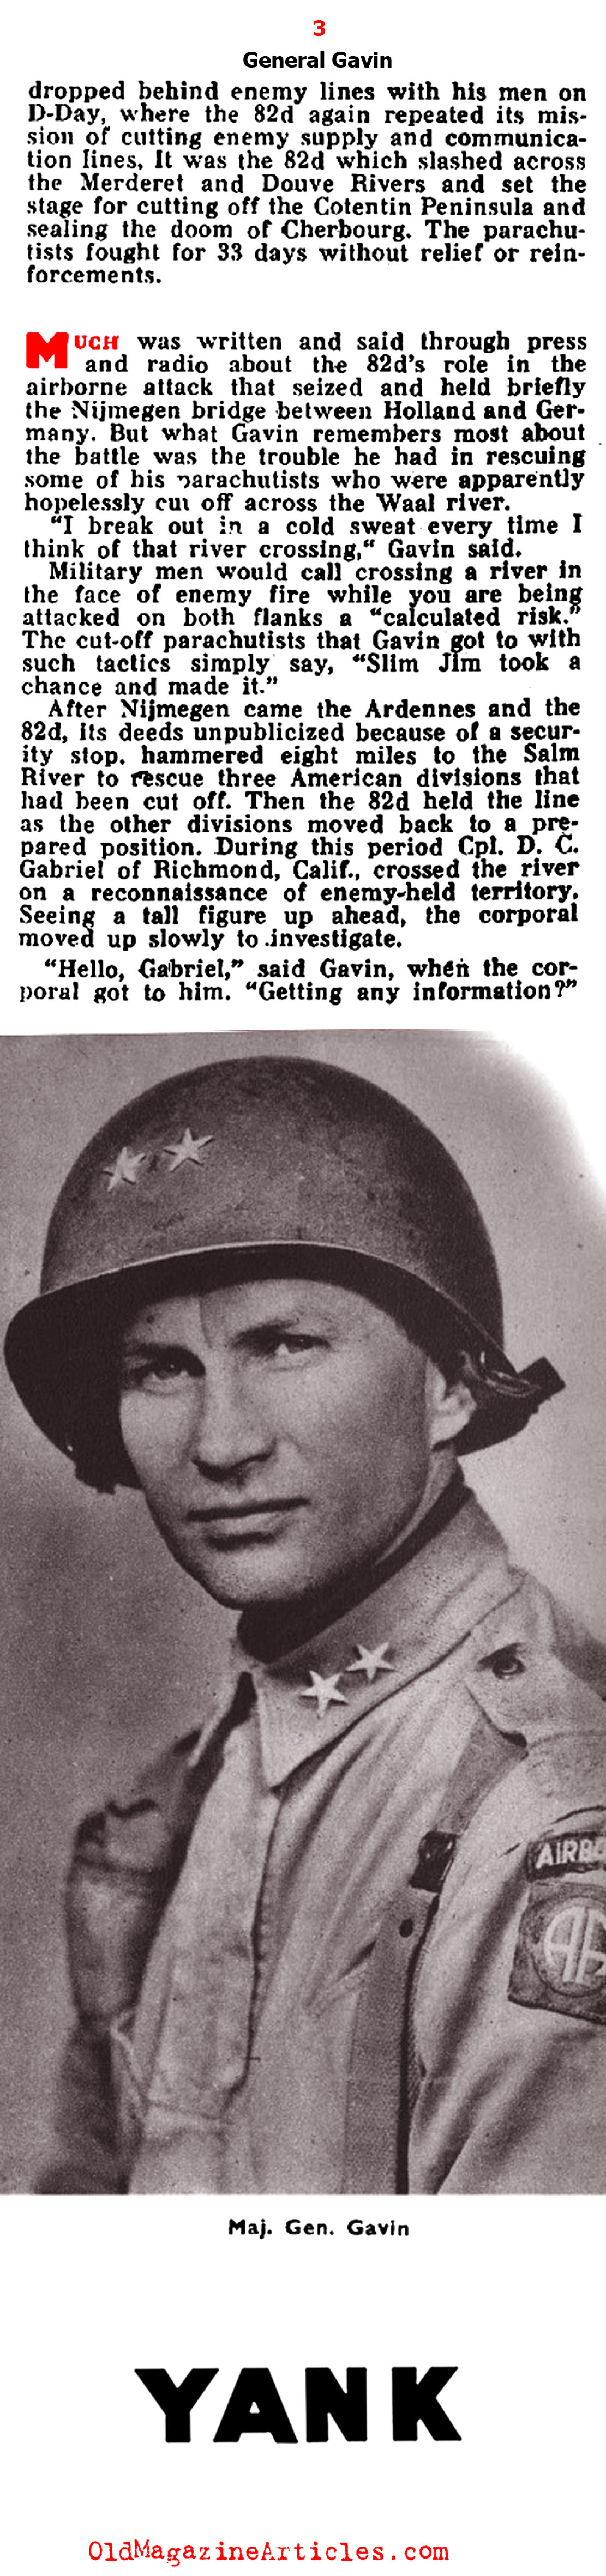 The Jumping General: James Gavin of the 82nd Airborne (Yank Magazine, 1945)